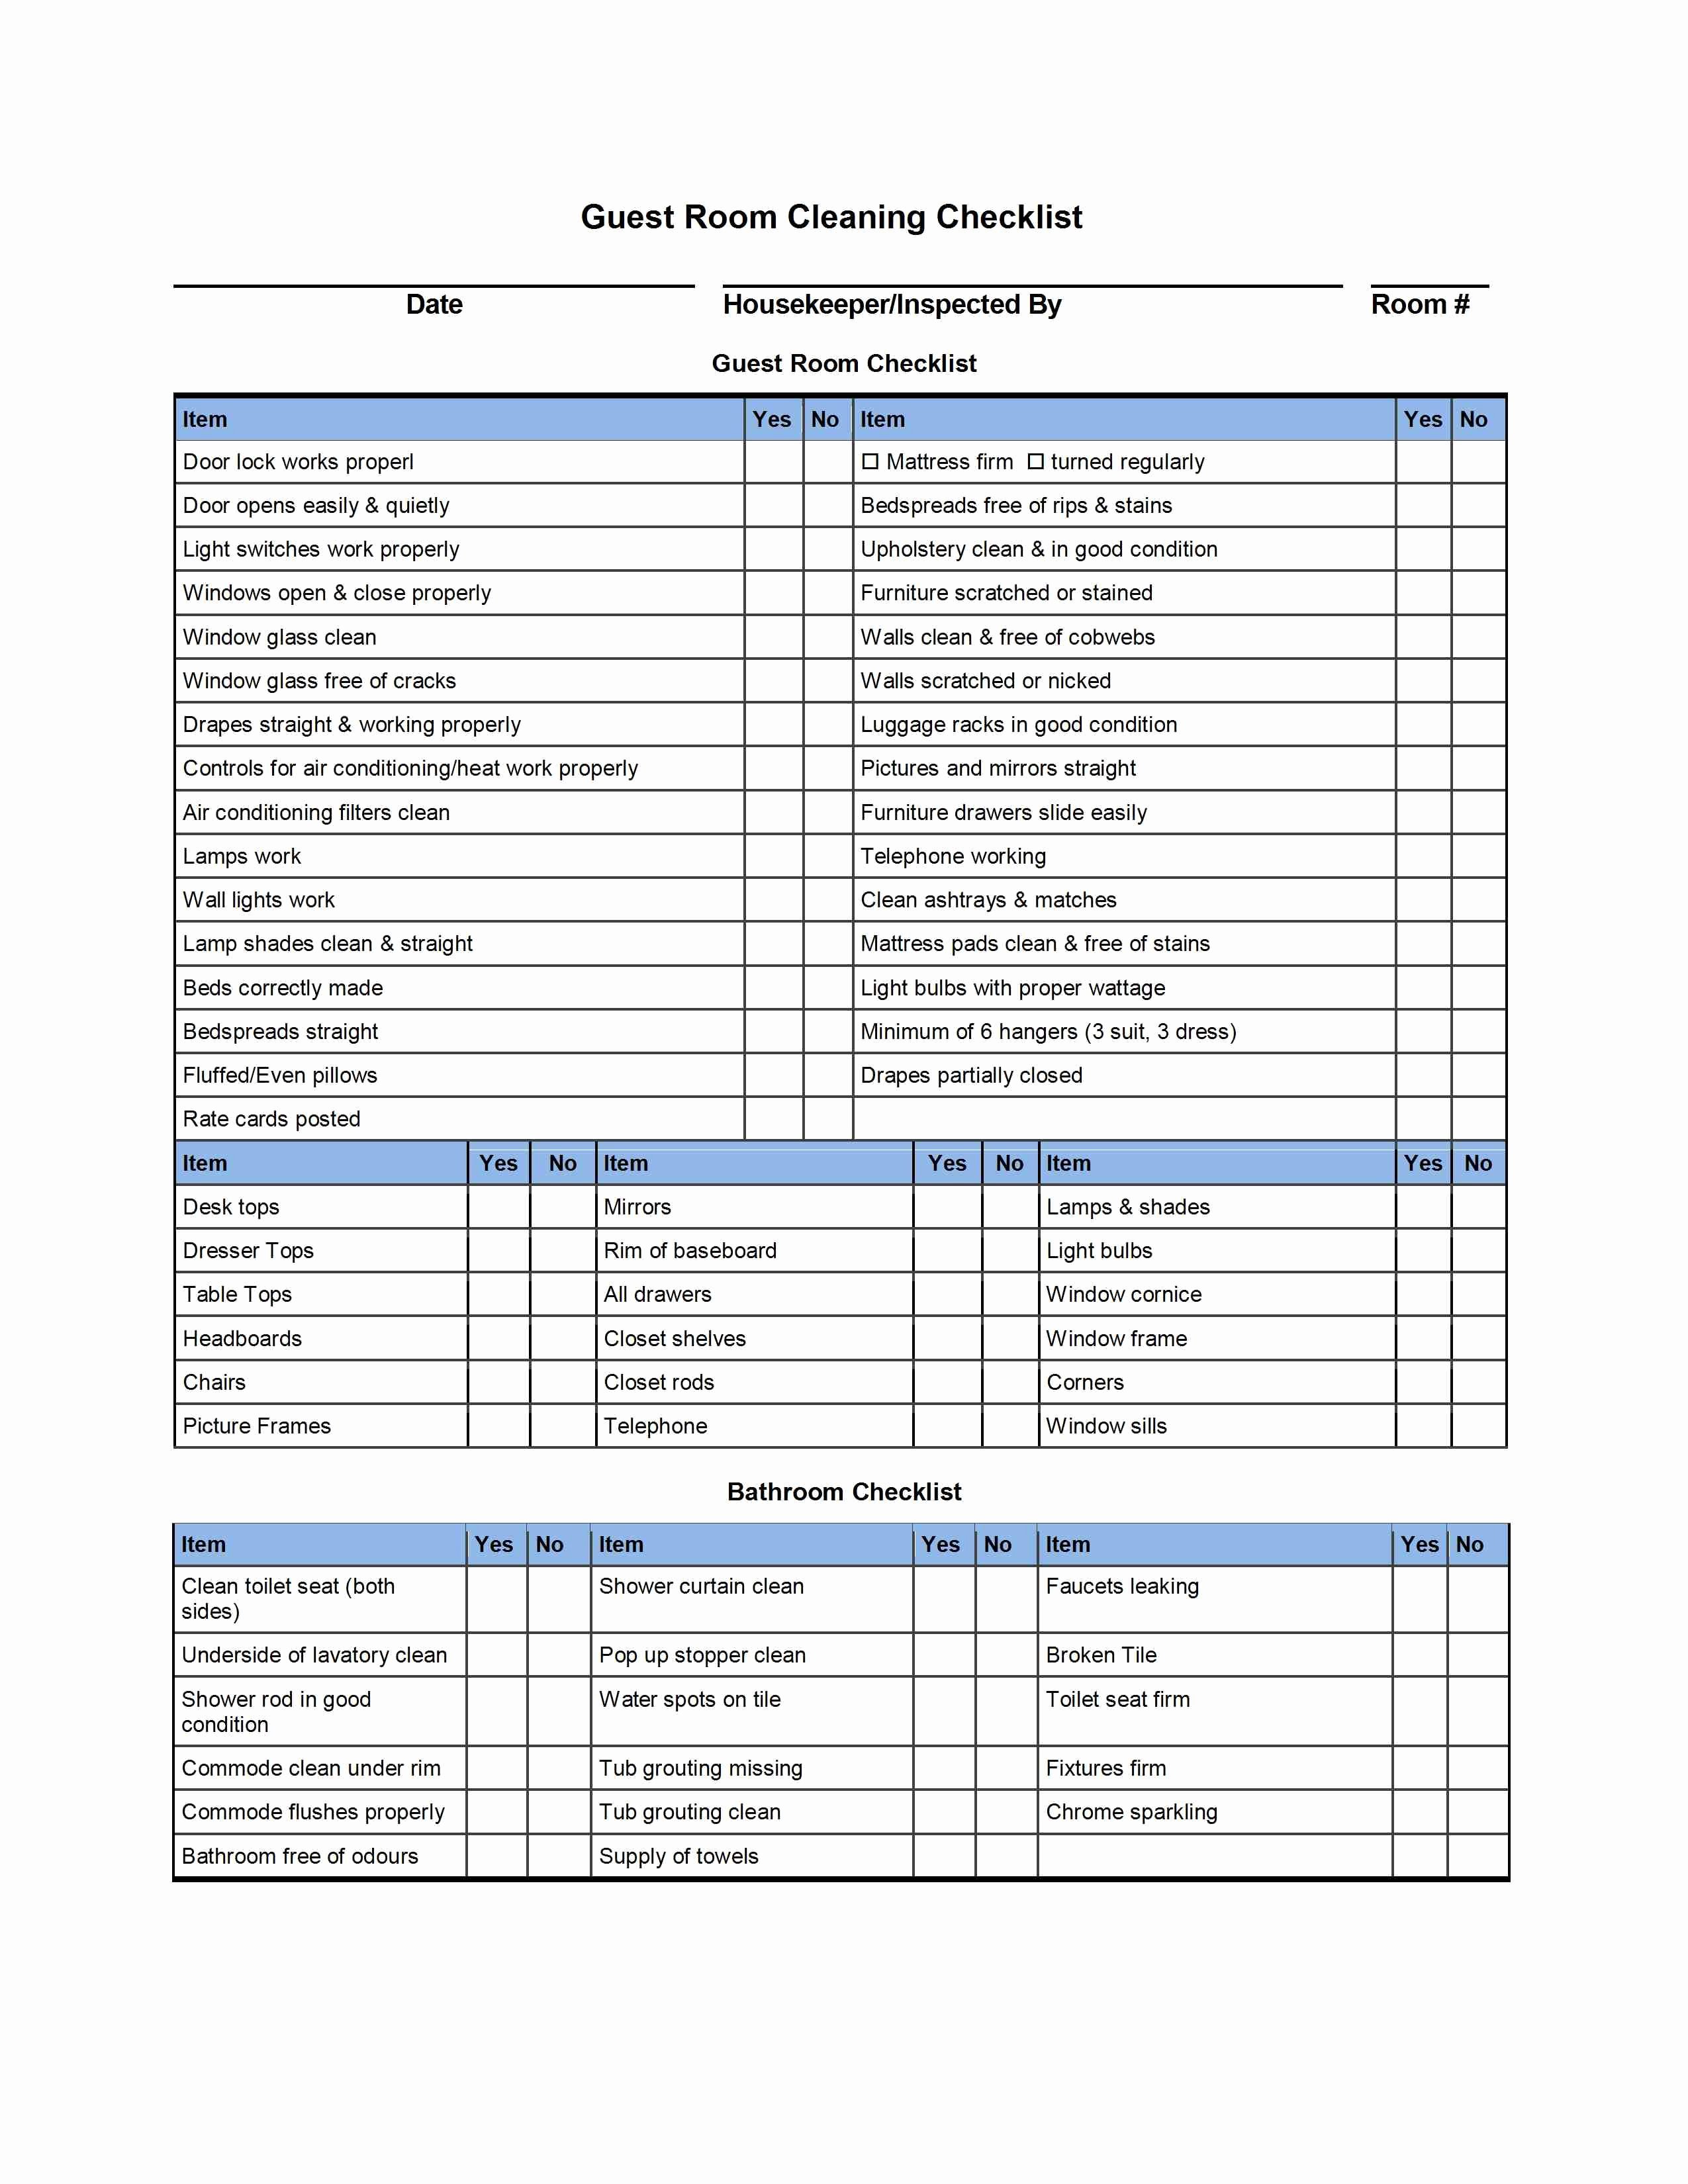 Daycare Cleaning Checklist Templates Fresh Hotel Room Cleaning Checklist Templates External House